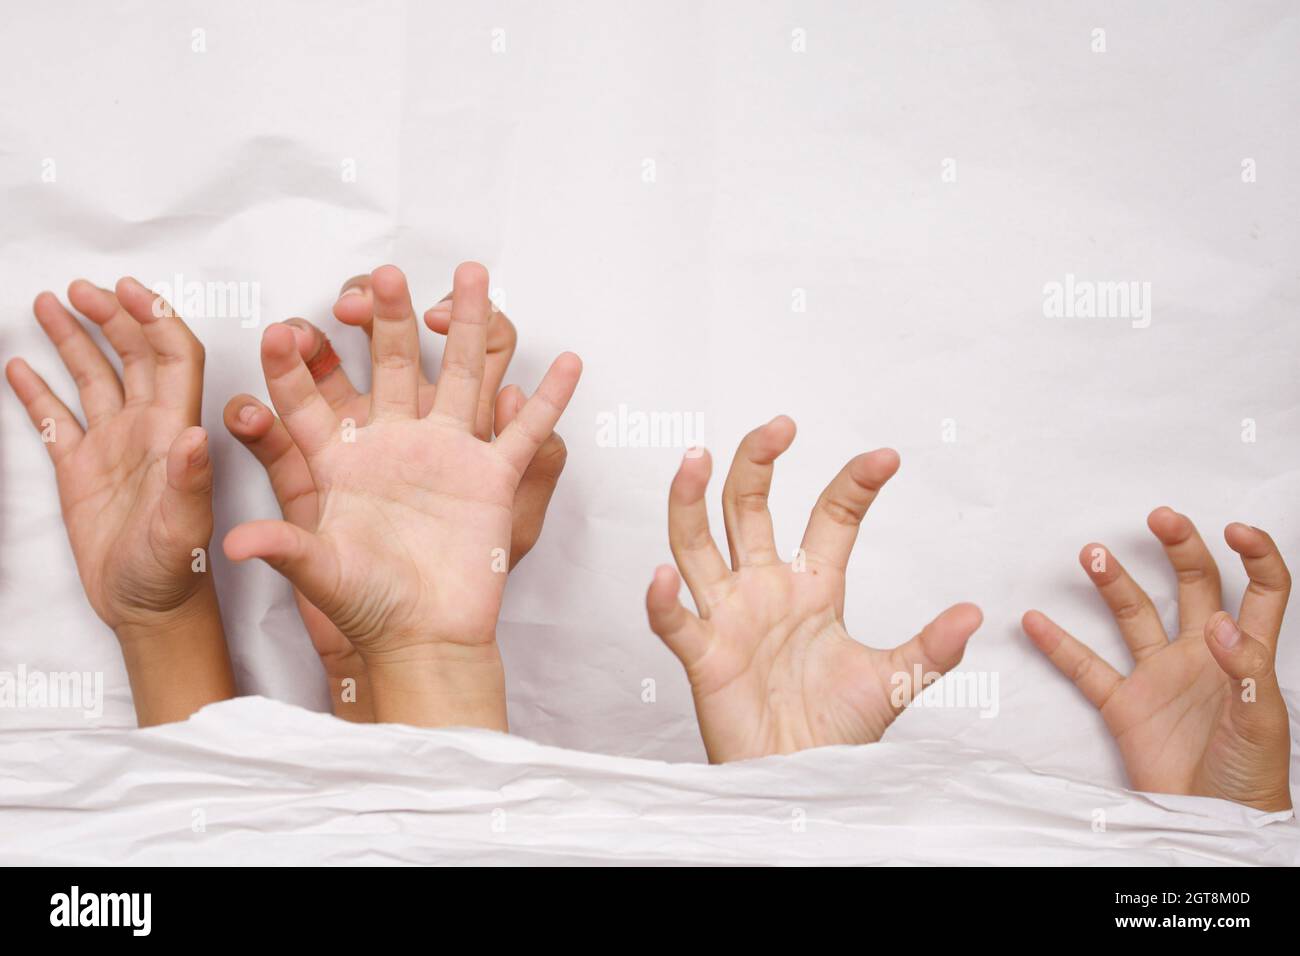 People Hands Over Blanket On Bed Stock Photo